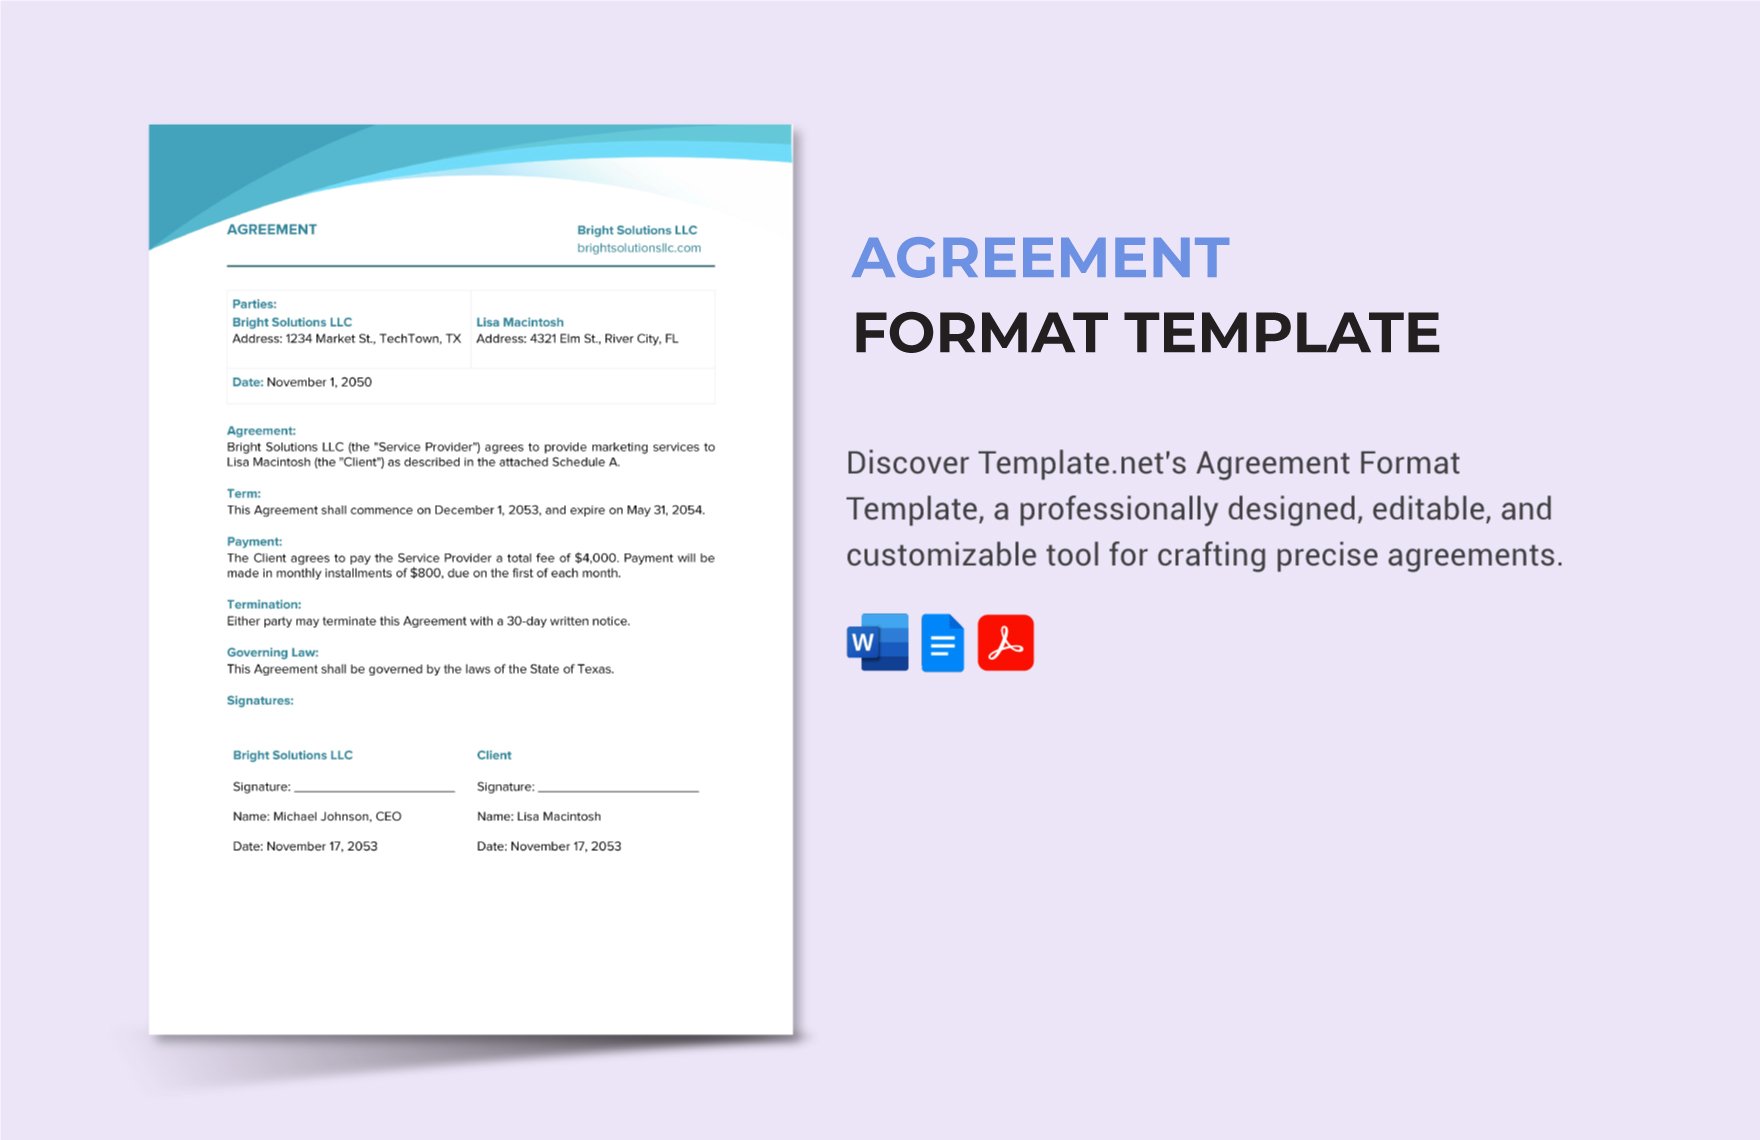 Agreement Format Template